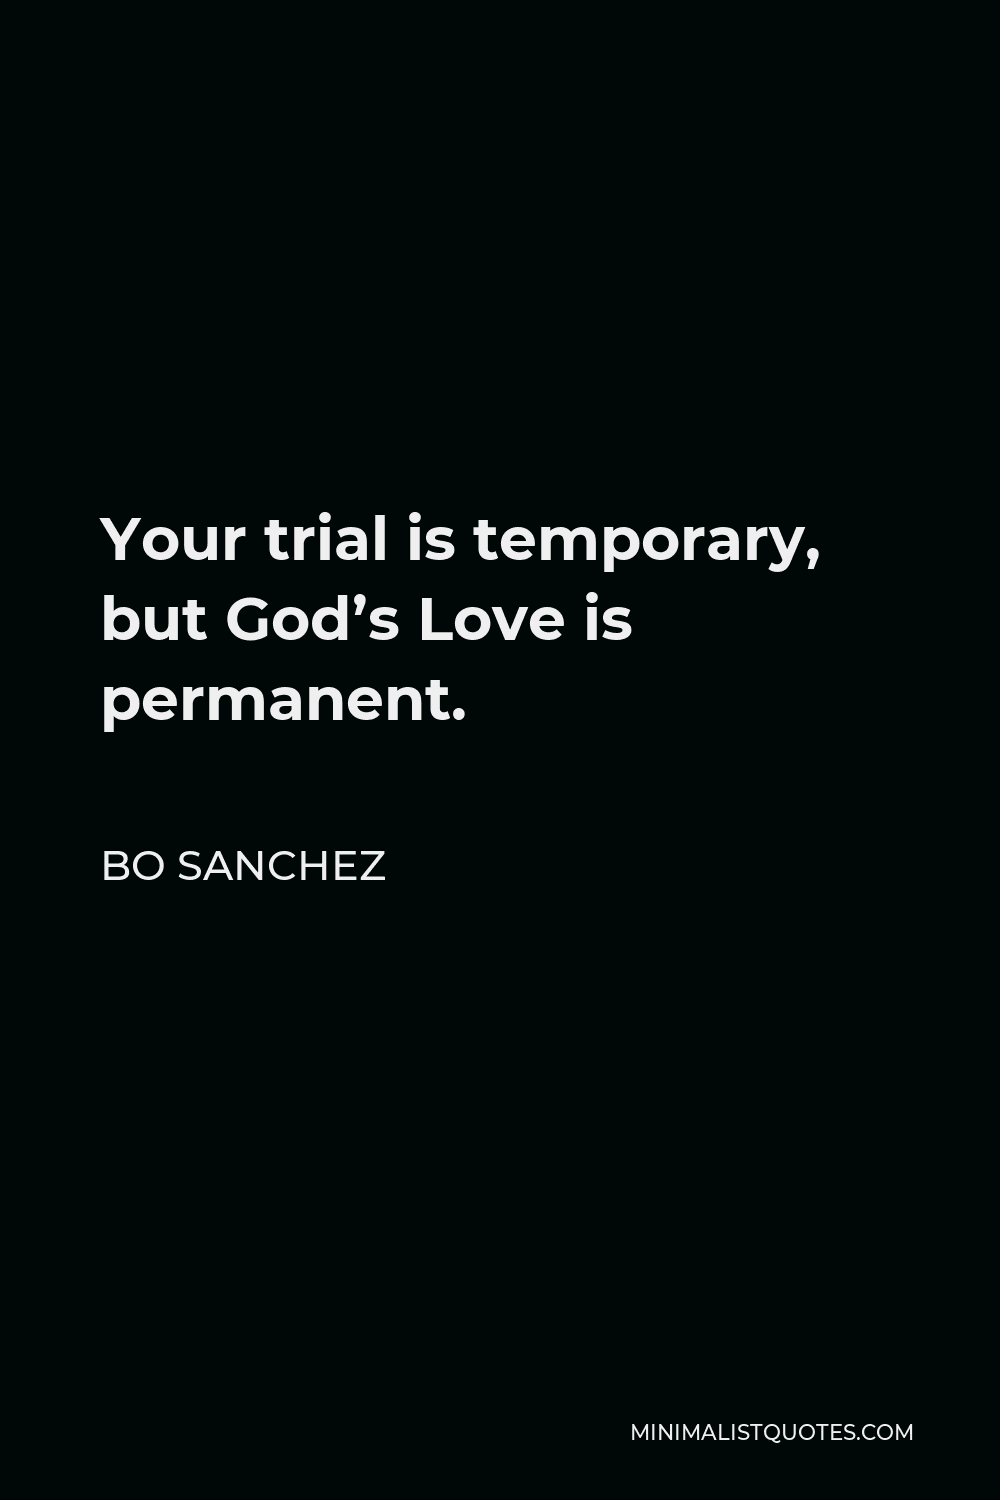 Bo Sanchez Quote - Your trial is temporary, but God’s Love is permanent.